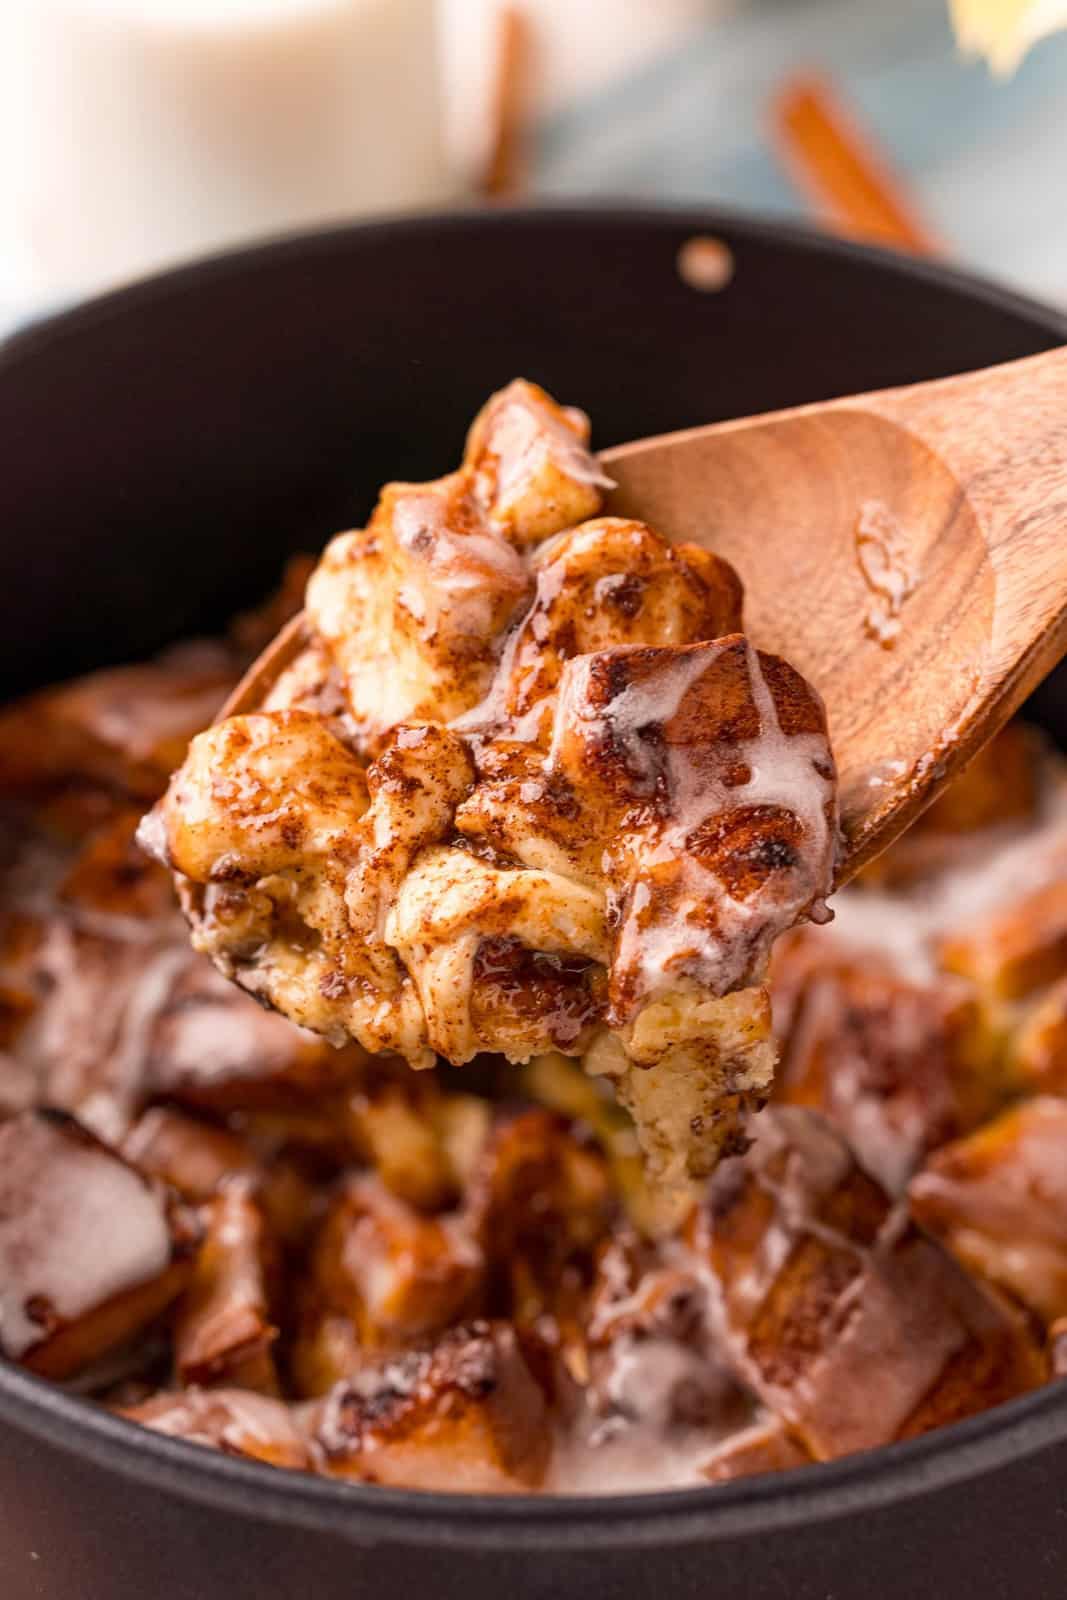 Wooden spoon scooping some Cinnamon Roll Casserole out of baking pan